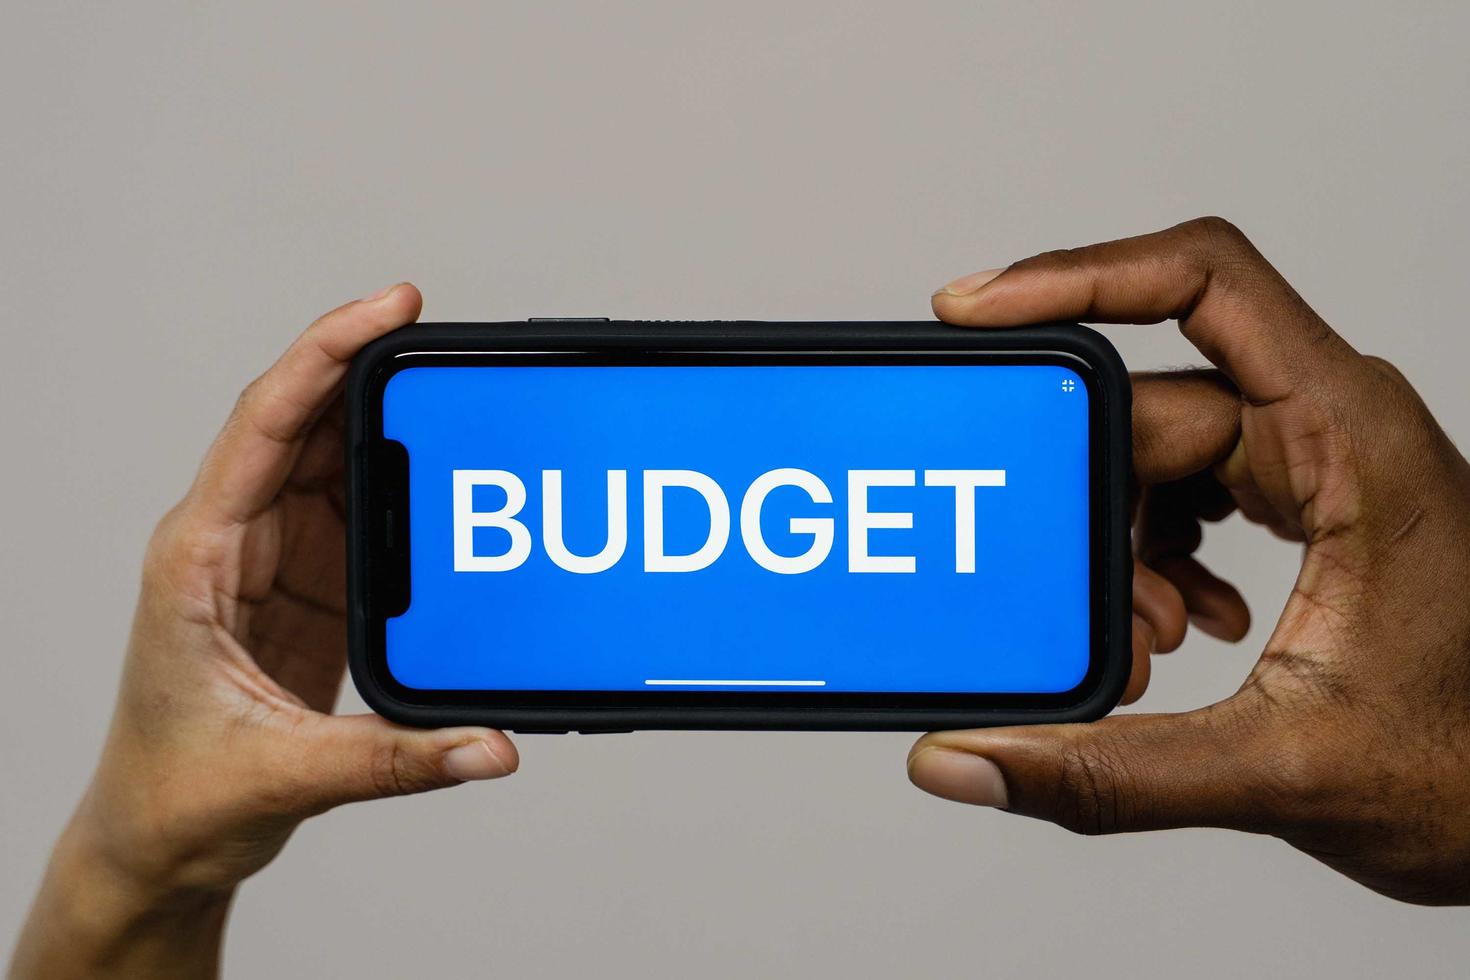 Hands holding a smart phone with "budget" written on it